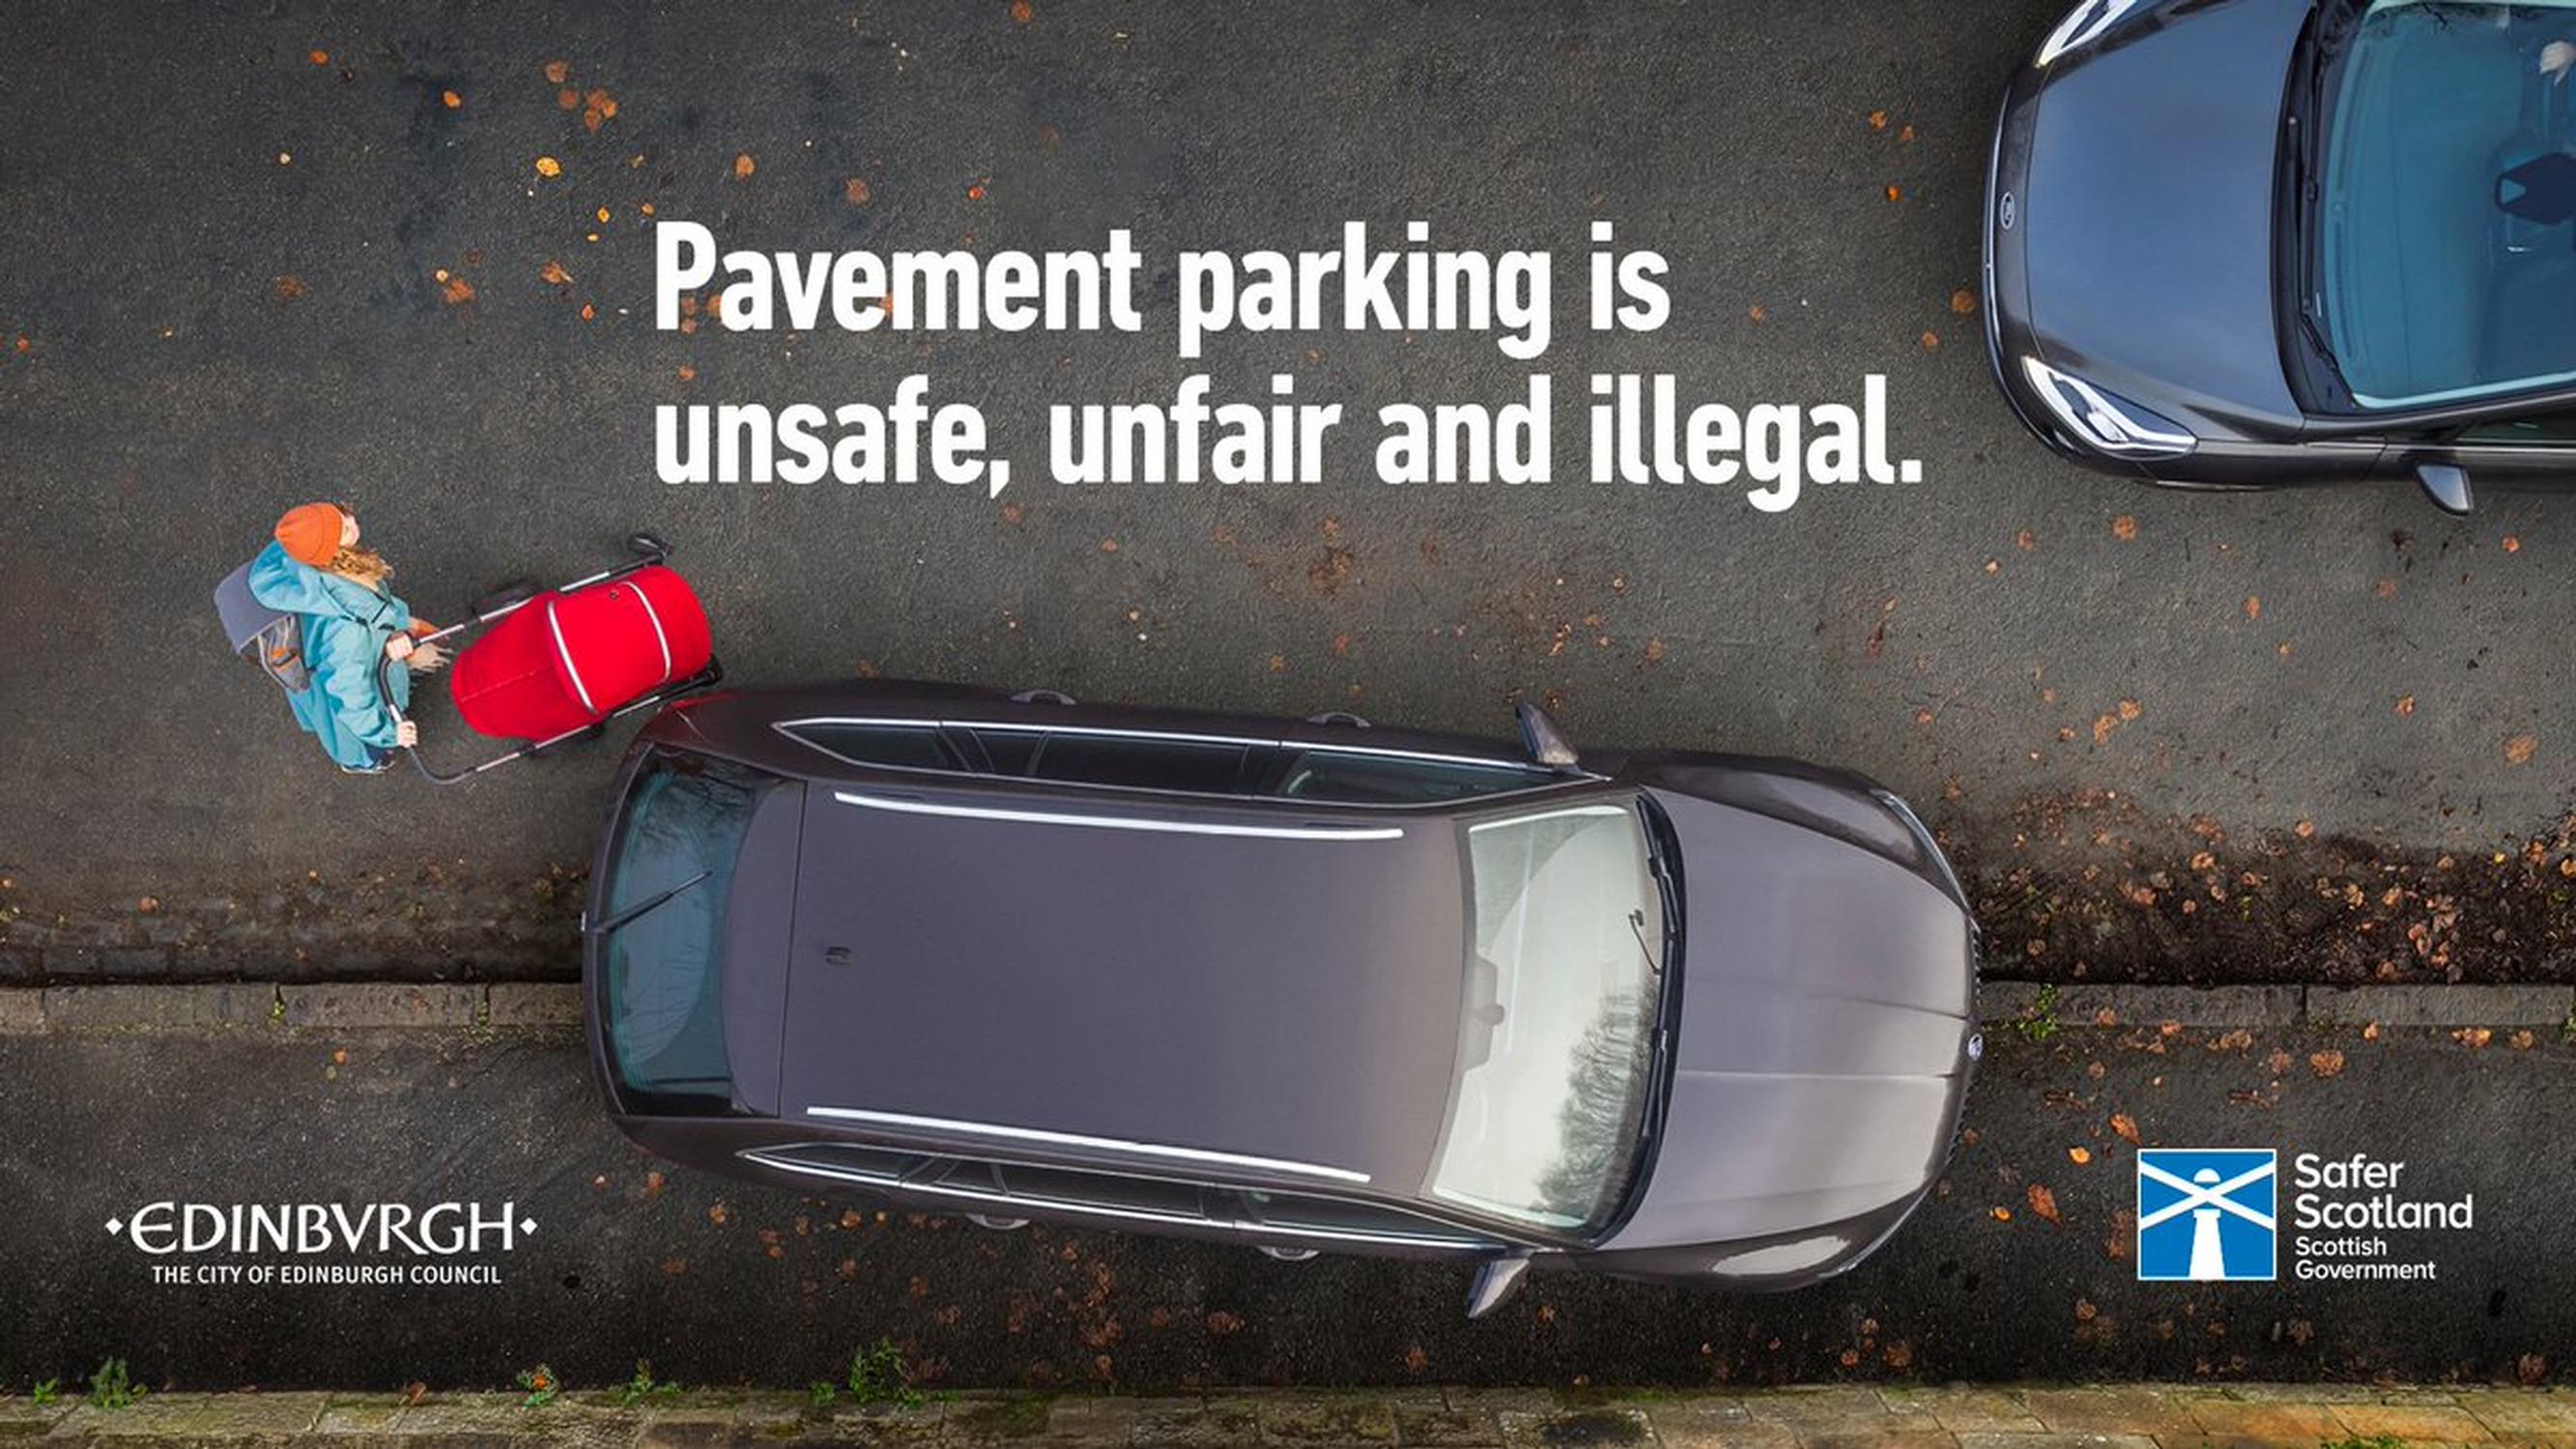 City of Edinburgh will be the first Scottish local authority to adopt new pavement parking rules